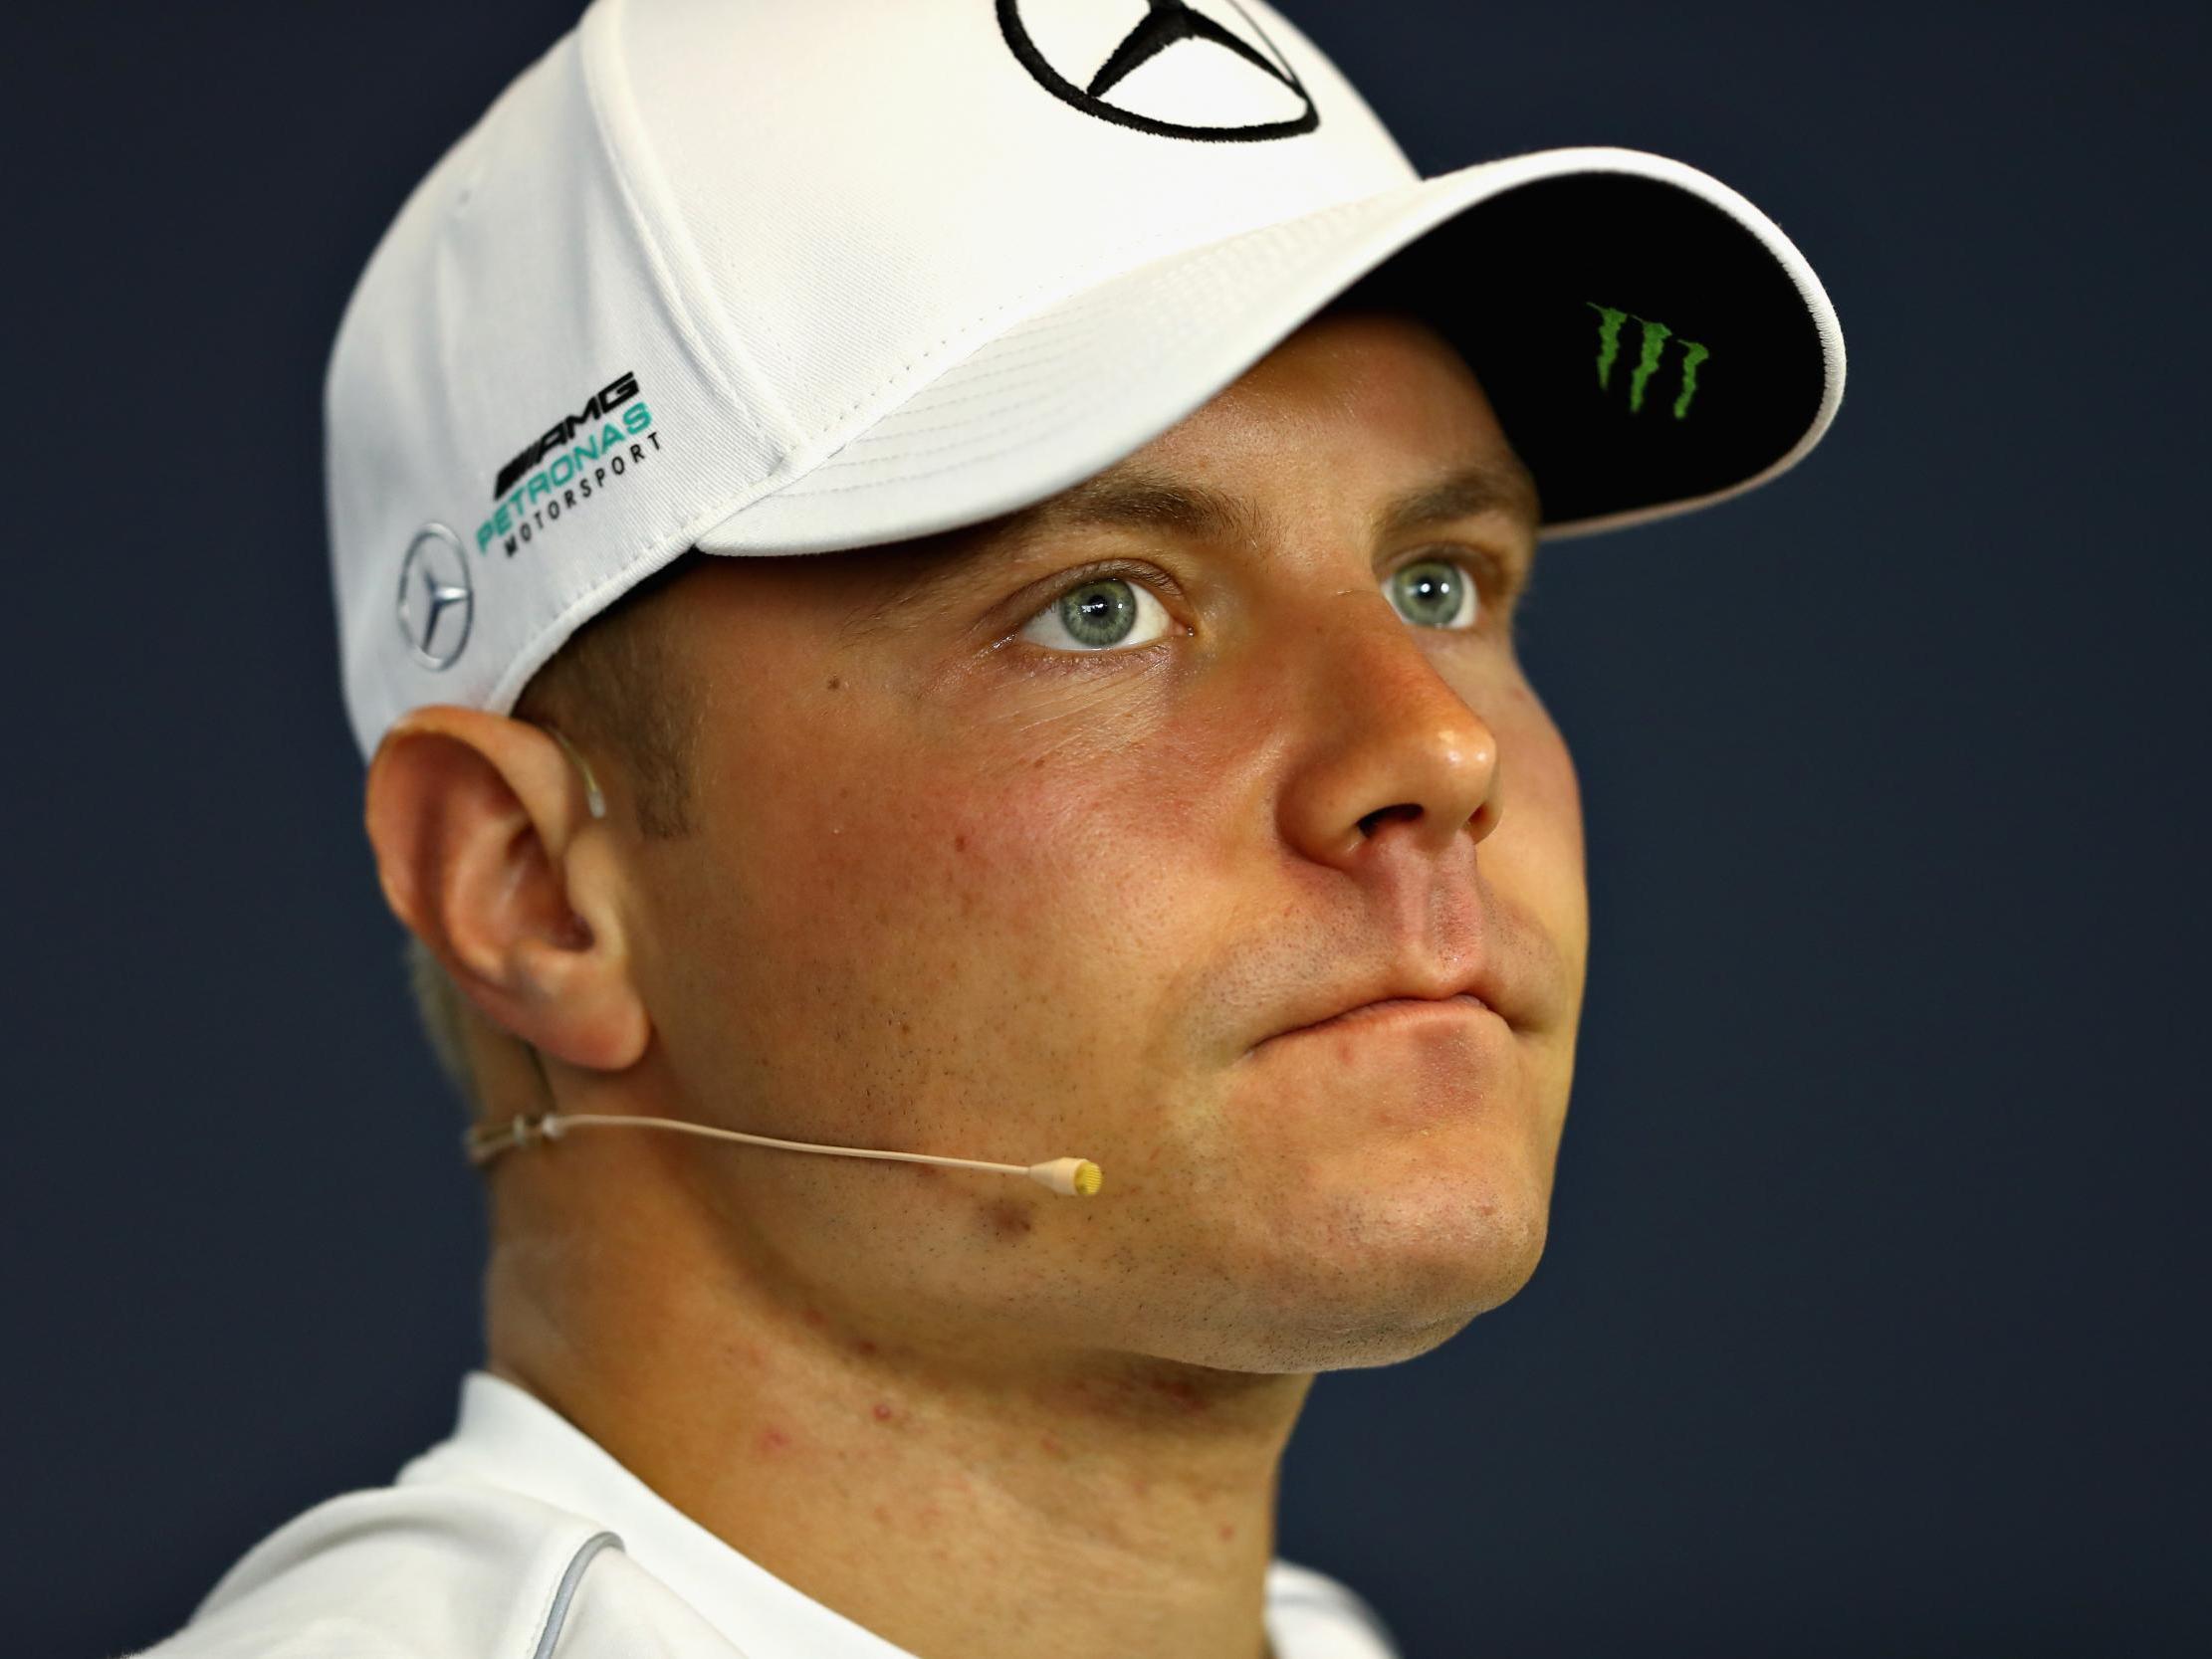 Valtteri Bottas admitted that he expects the Ferraris to be very fast this weekend